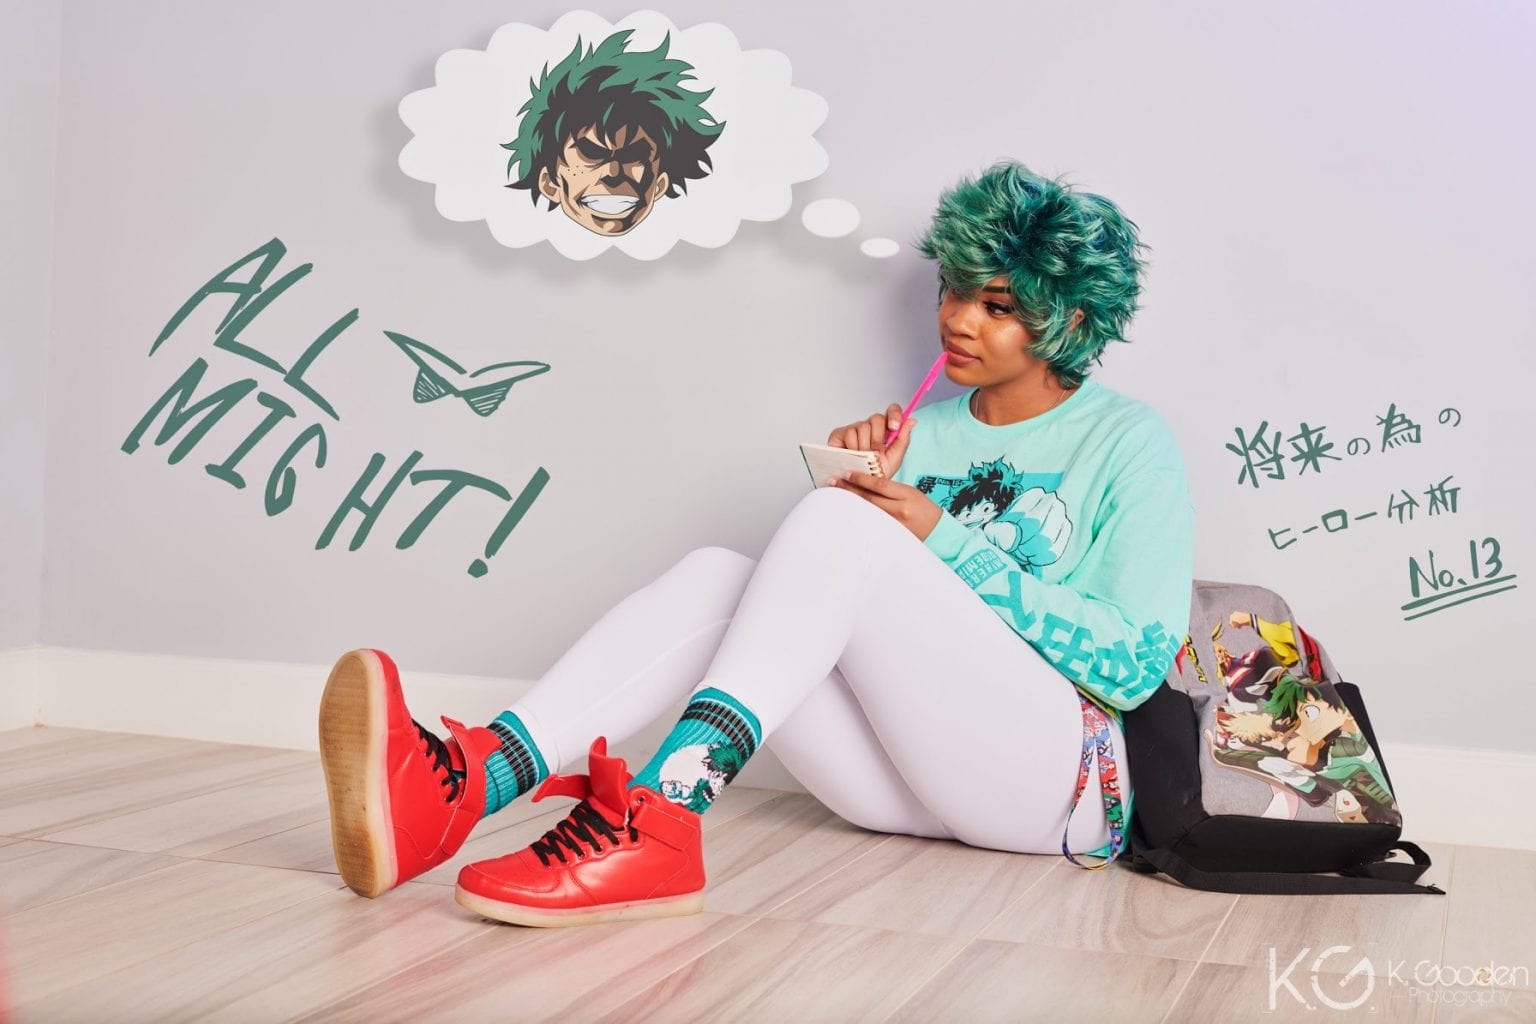 BCC dressed as Deku from My Hero Academia with a teal hoodie, white leggings, red shoes and teal wig. sitting down dreaming of being a buff super